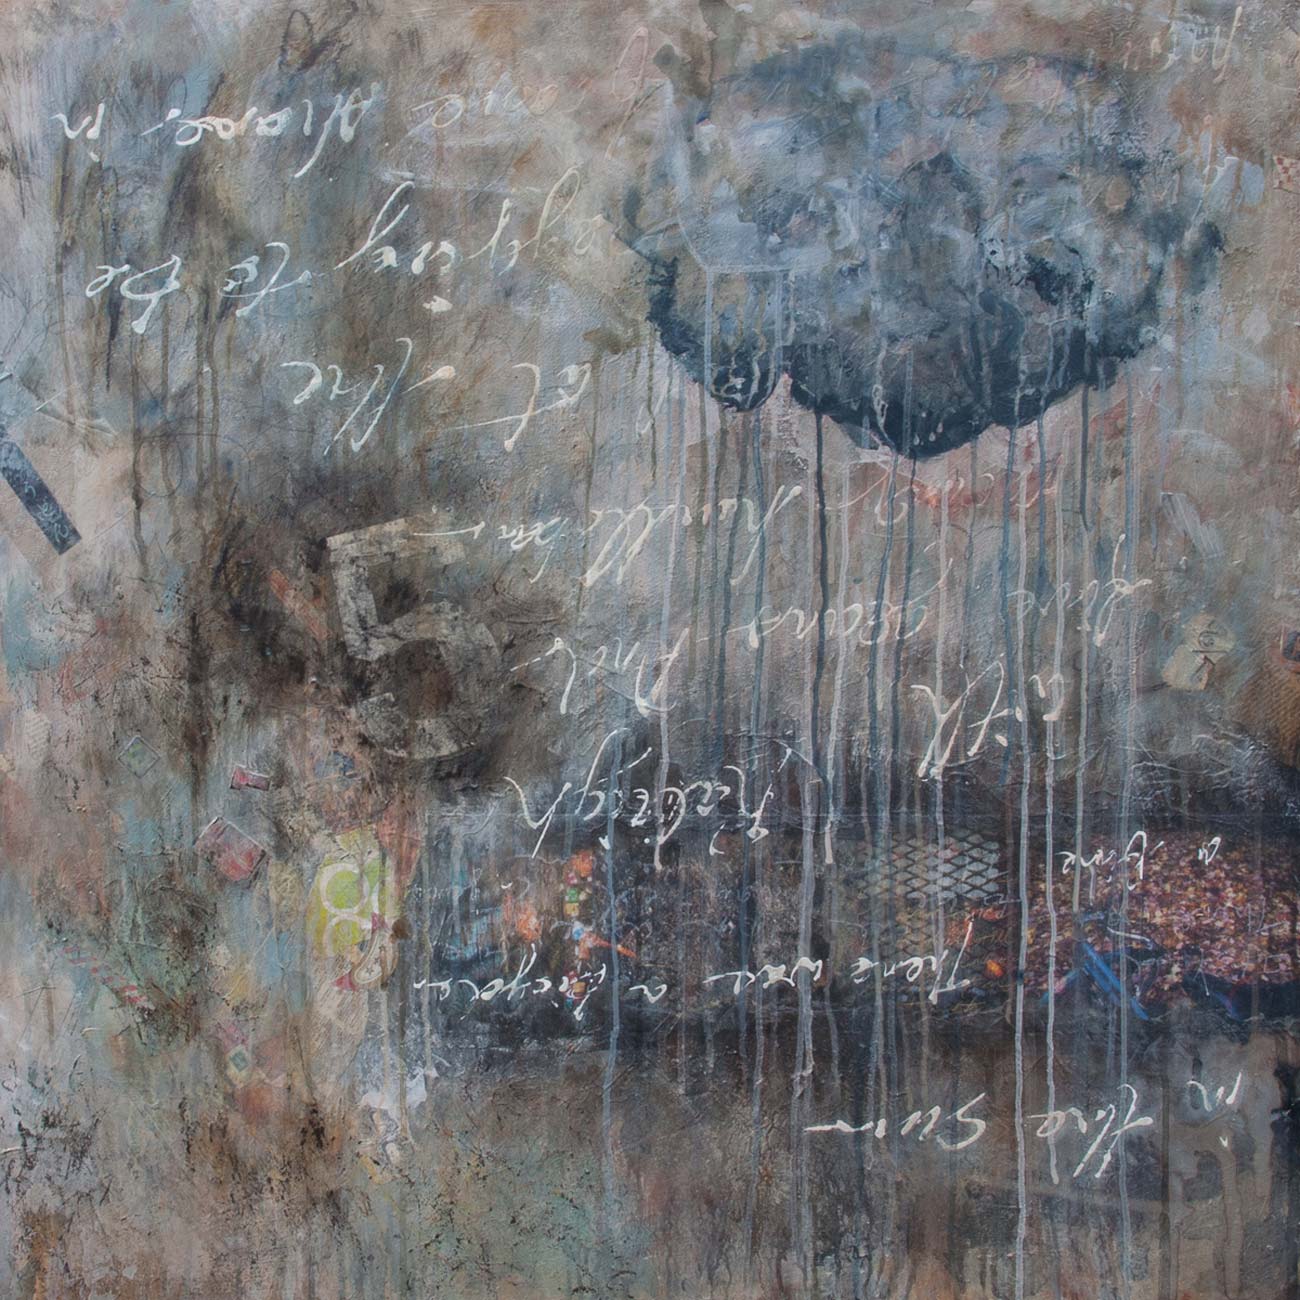 Riding the Storm, 2013, mixed media on wood, 36" x 36"